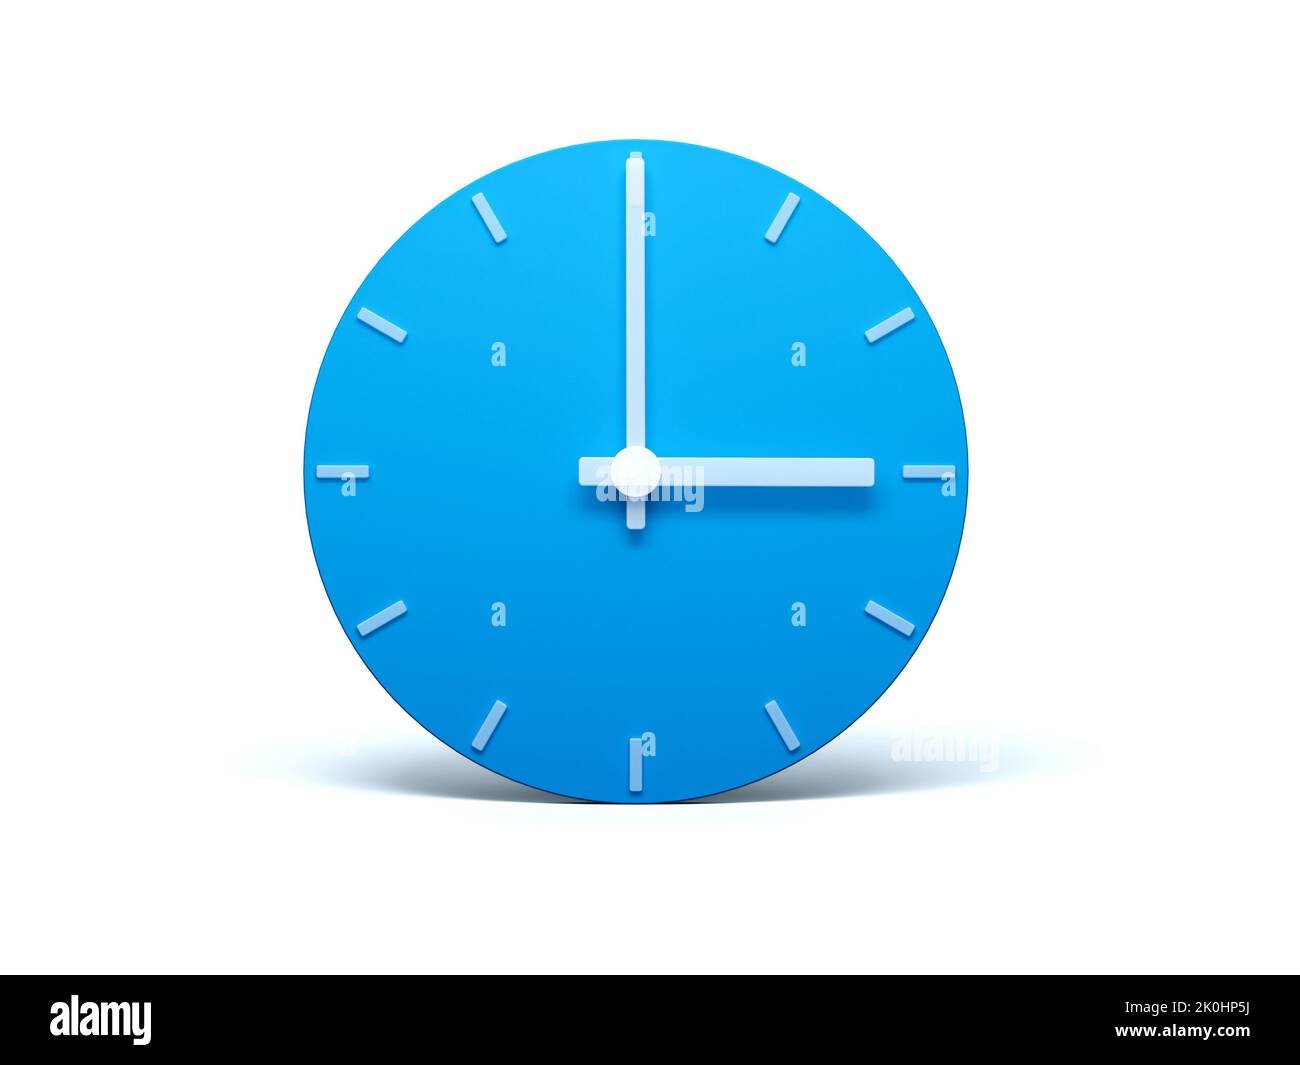 A 3d illustration of a blue wall clock showing 3 o'clock isolated on white background Stock Photo